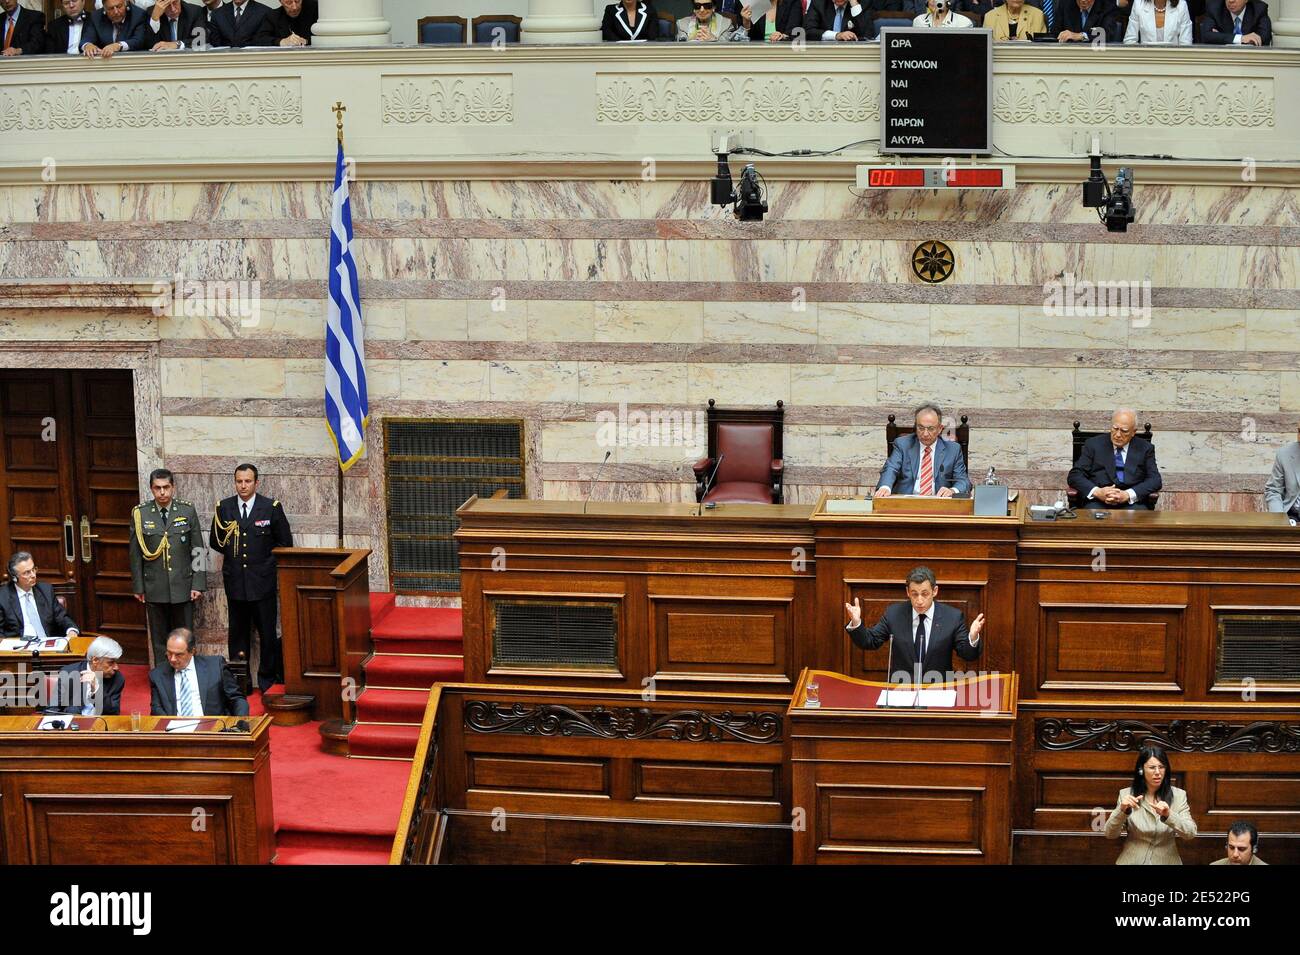 Greek President Karolos Papoulias (Back-R) and speaker of the Greek parliament Dimitri Sioufas (C-back) watch French President Nicolas Sarkozy addressing the parliamen in Athens, Greece on June 6, 2008. Sarkozy arrived in Greece Friday for an official visit, the first by a French head of state in more than 25 years. Sarkozy was addressing the Greek parliament in a ceremony only accorded to three foreign presidents in the past: his predecessor Charles de Gaulle and US presidents Dwight Eisenhower and George Bush Sr. Photo by Mousse/ABACAPRESS.COM Stock Photo